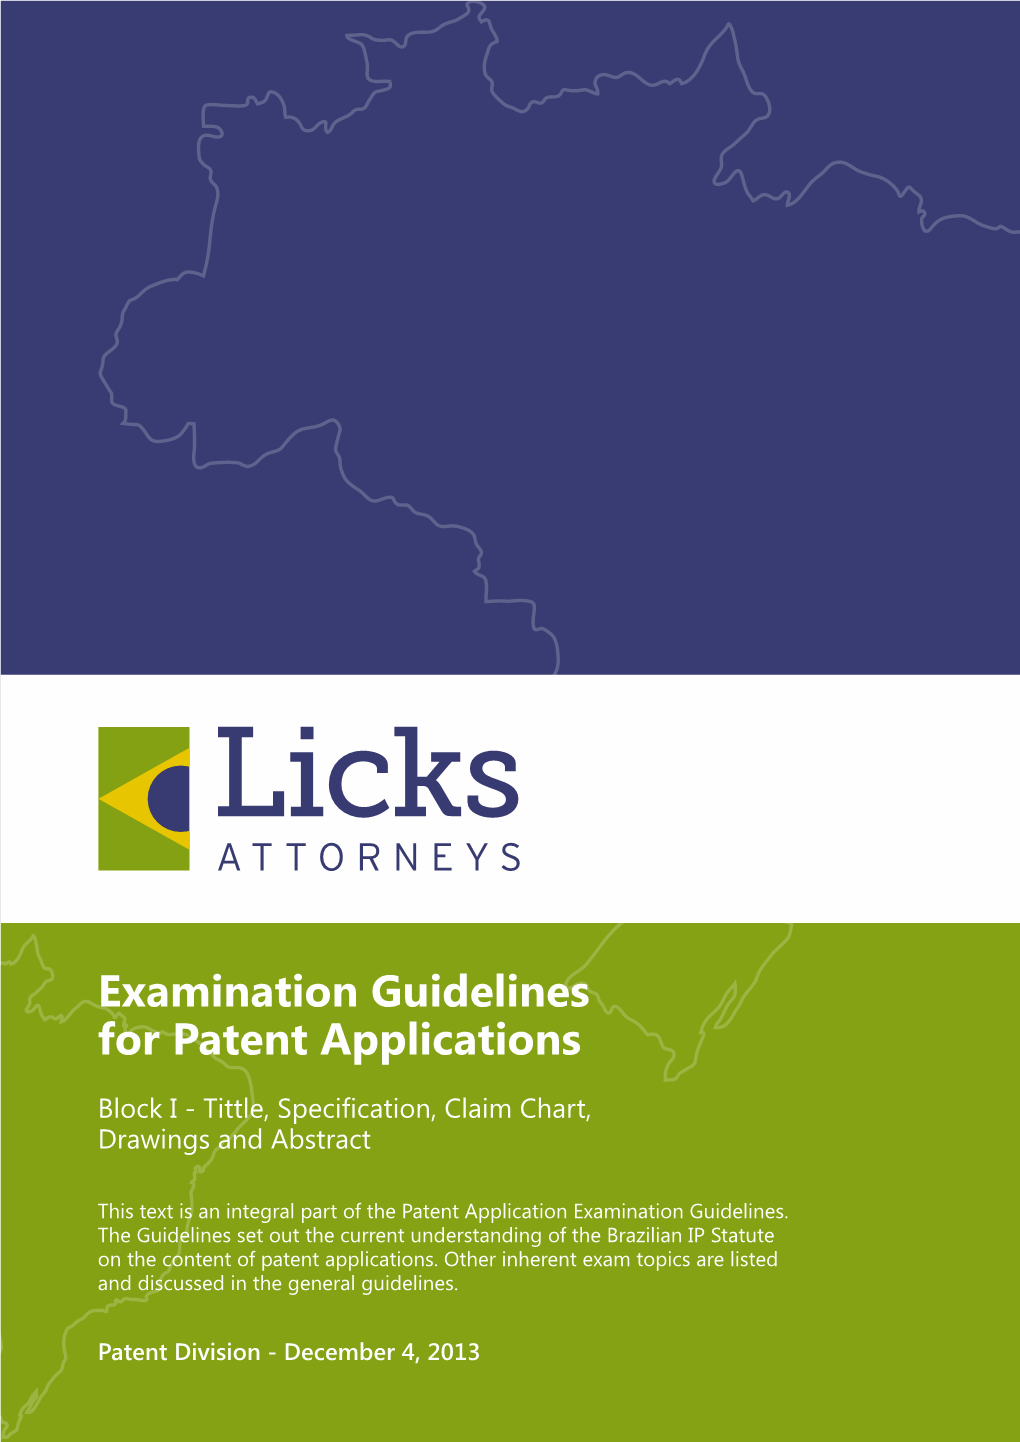 Examination Guidelines for Patent Applications